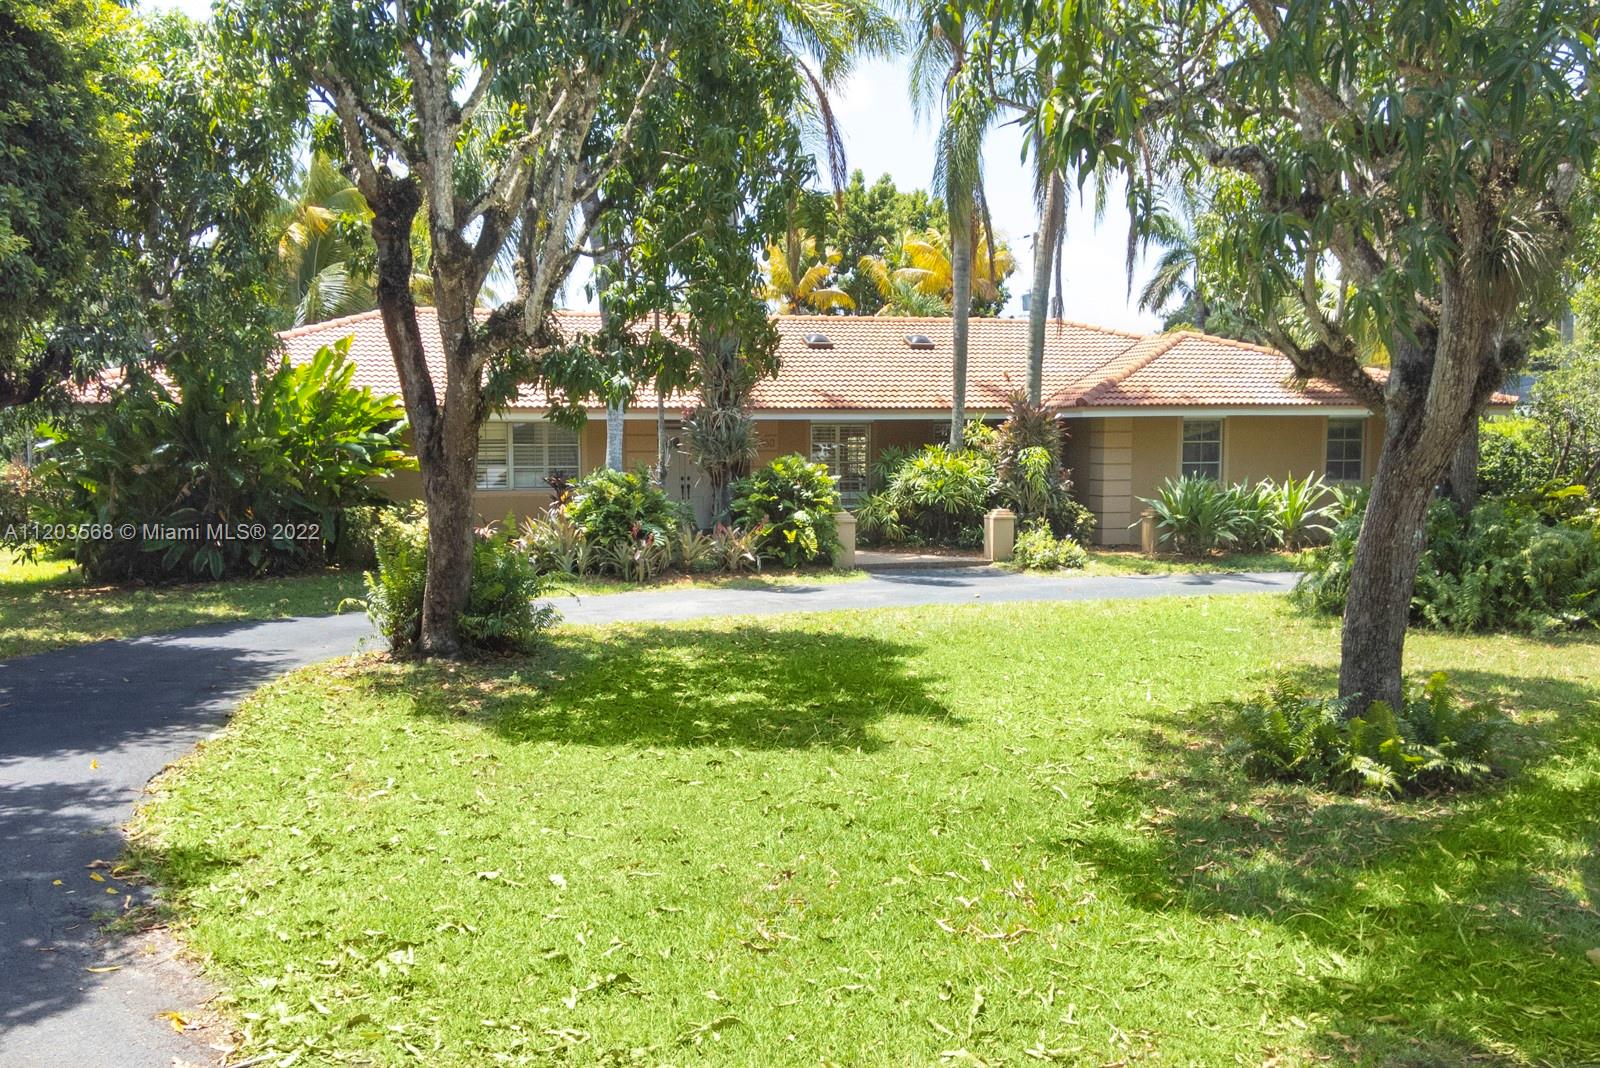 Sought after and rarely found 5-bedroom family home on an oversized half acre lot on quiet no traffic North Pinecrest street. Split plan, tile roof, enlarged wood kitchen, wood flooring in bedrooms, 2 skylights.  Great layout with 2-car garage, deep pool, large cantilevered overhang (no columns) , big yard and privacy.  Hurricane shutters throughout (some impact glass windows) , flood zone "x" so no flood insurance required.  Pinecrest Elementary.